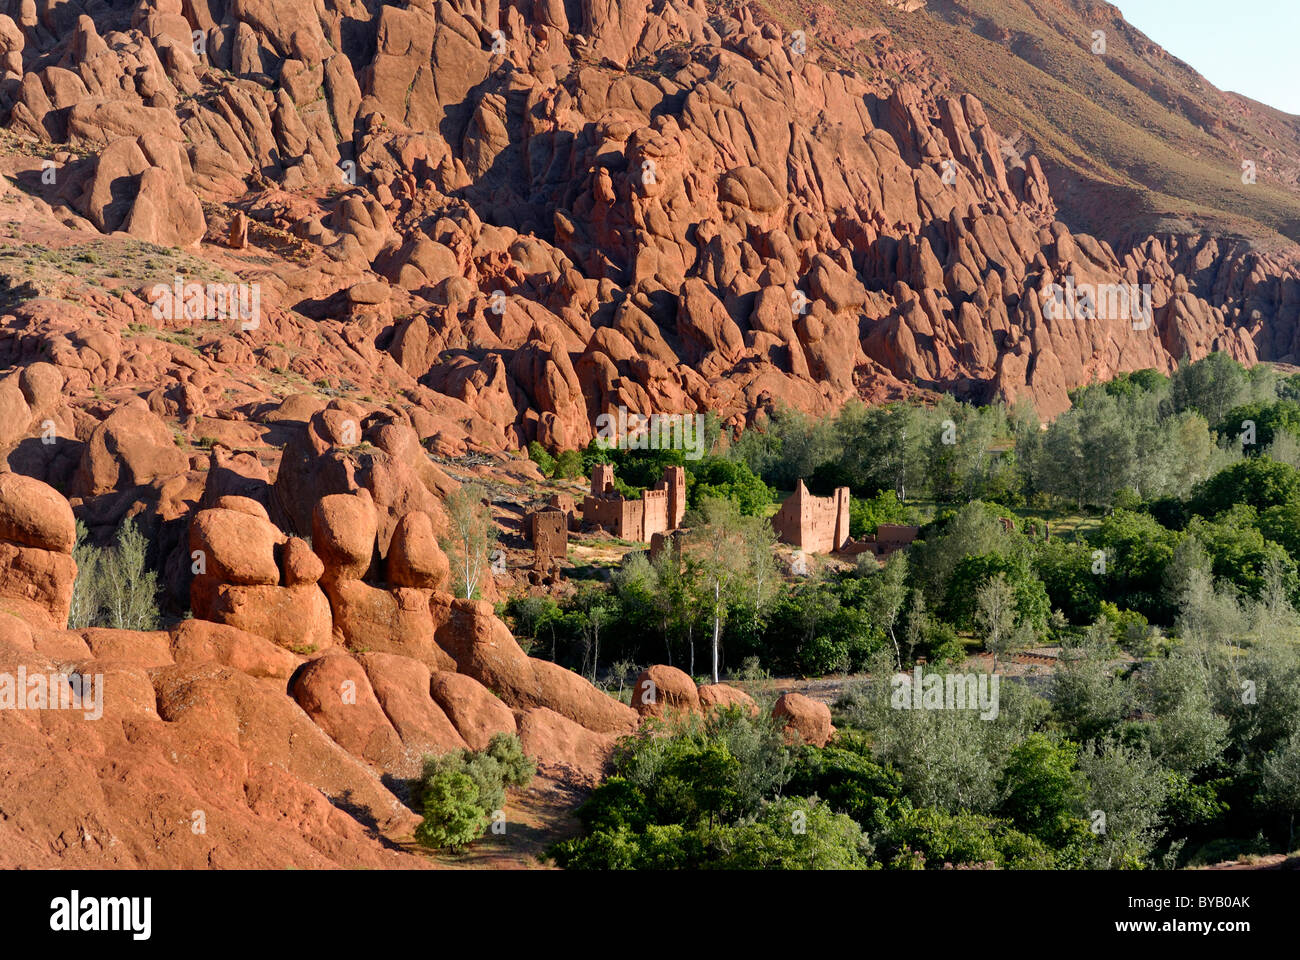 Kasbah, Dades Gorge, Morocco, Africa Stock Photo